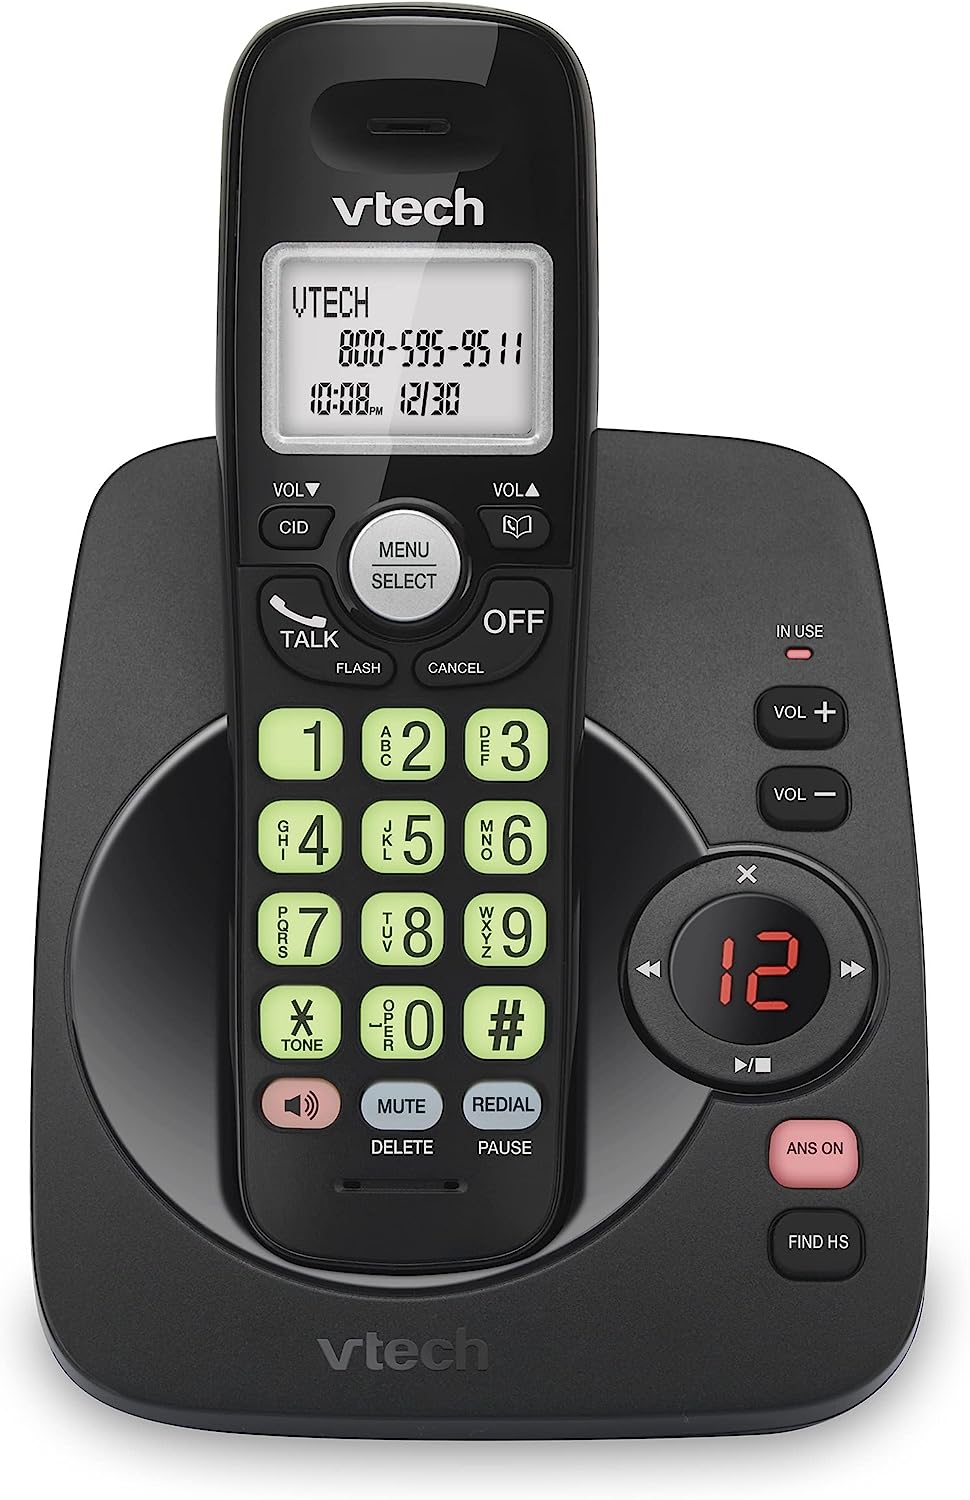 VTech VG104-11 DECT 6.0 Cordless Phone for Home with [...]